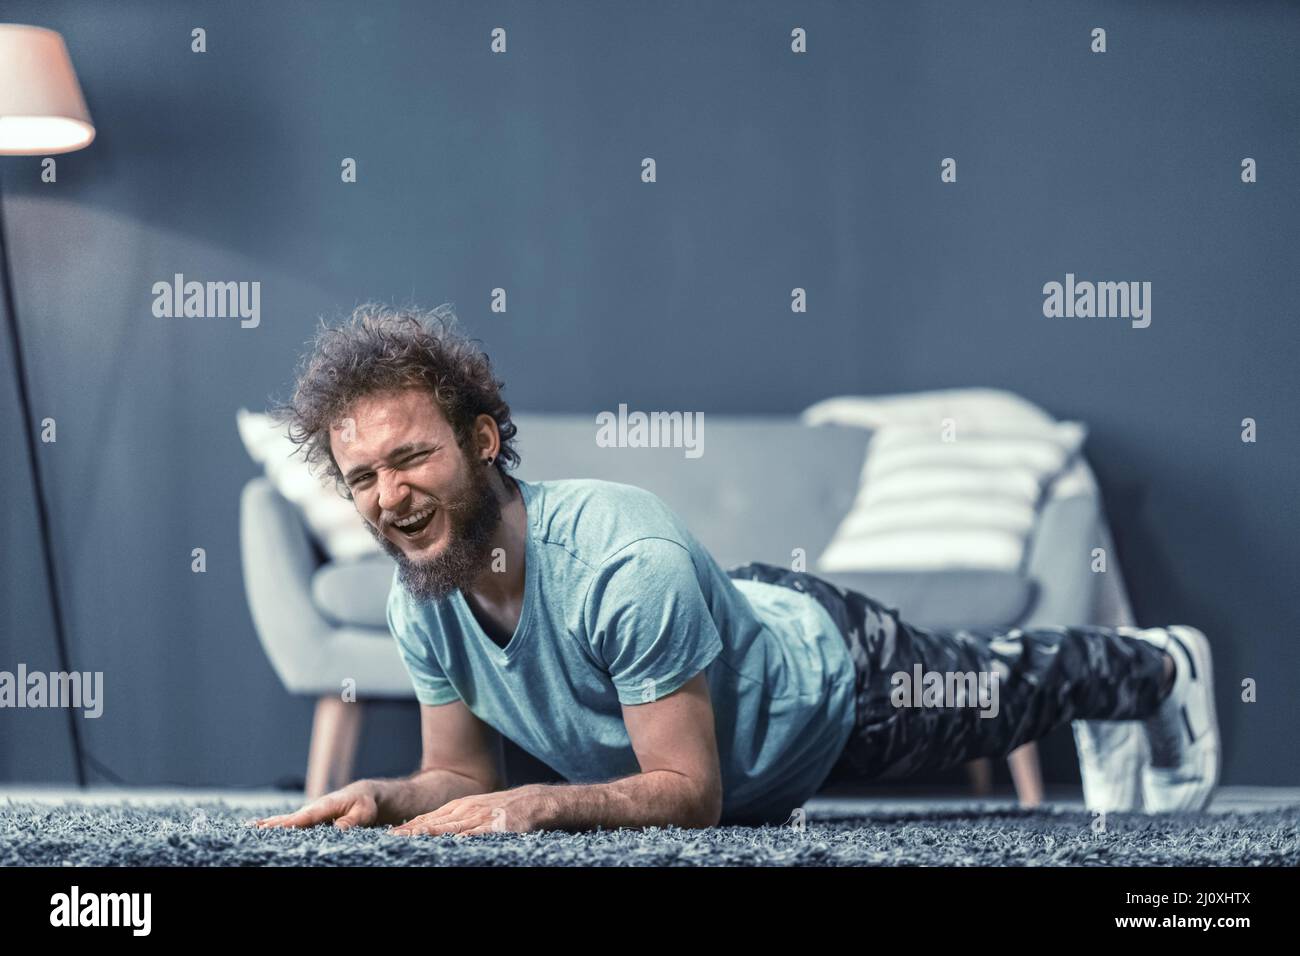 Handsome man doing push up or abs core plank exercise at home laughing looking at camera. Funny curly hair man with a mess beard Stock Photo